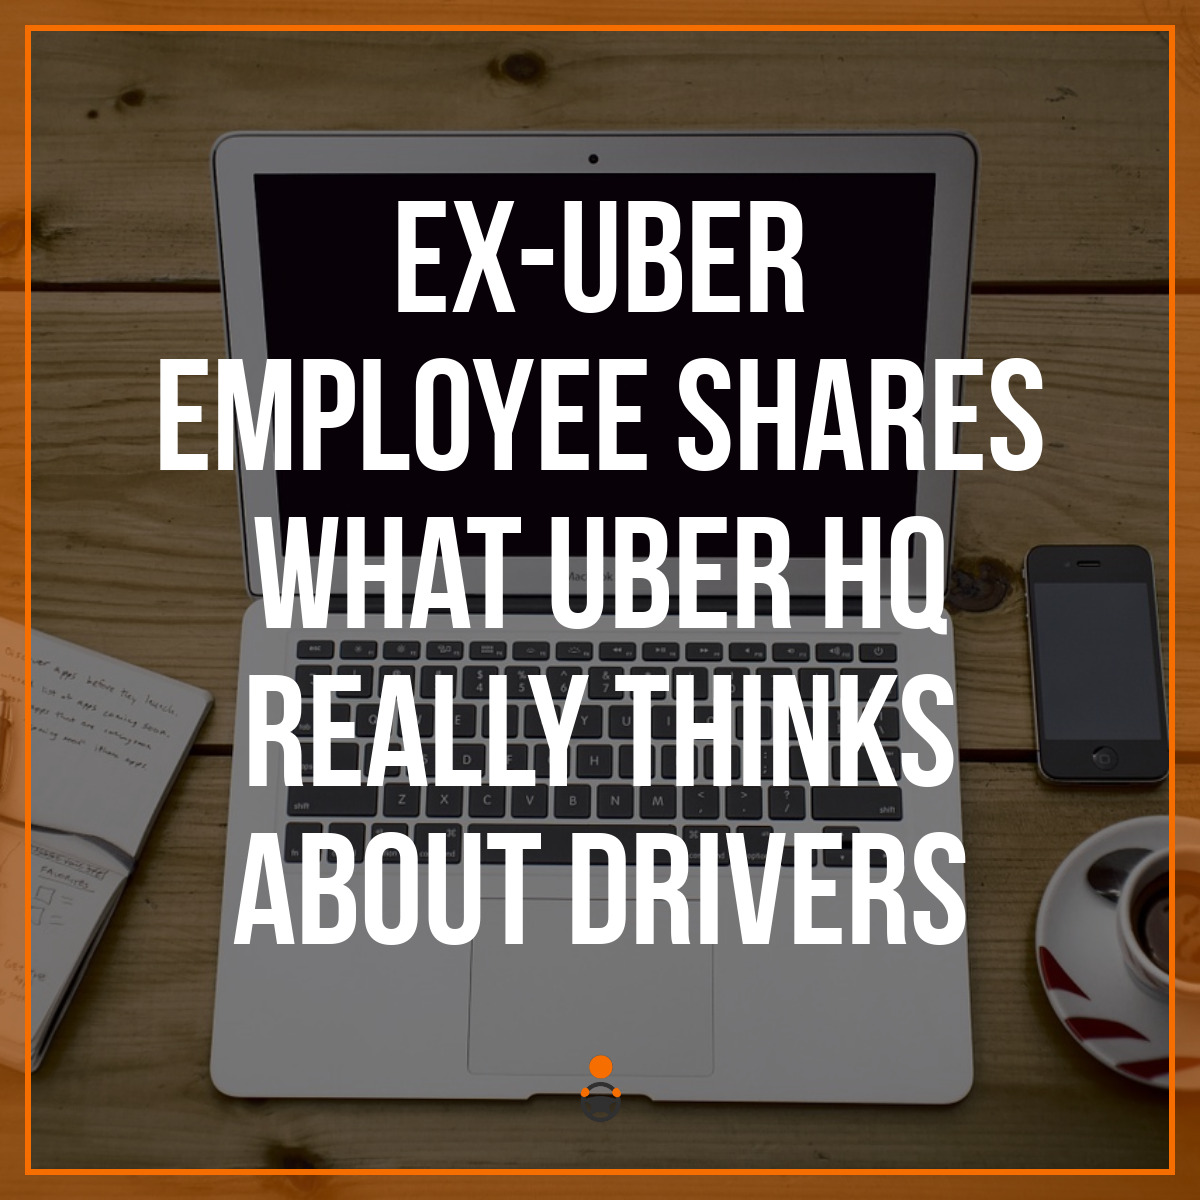 Ex-Uber Employee Shares What Uber HQ Really Thinks About Drivers